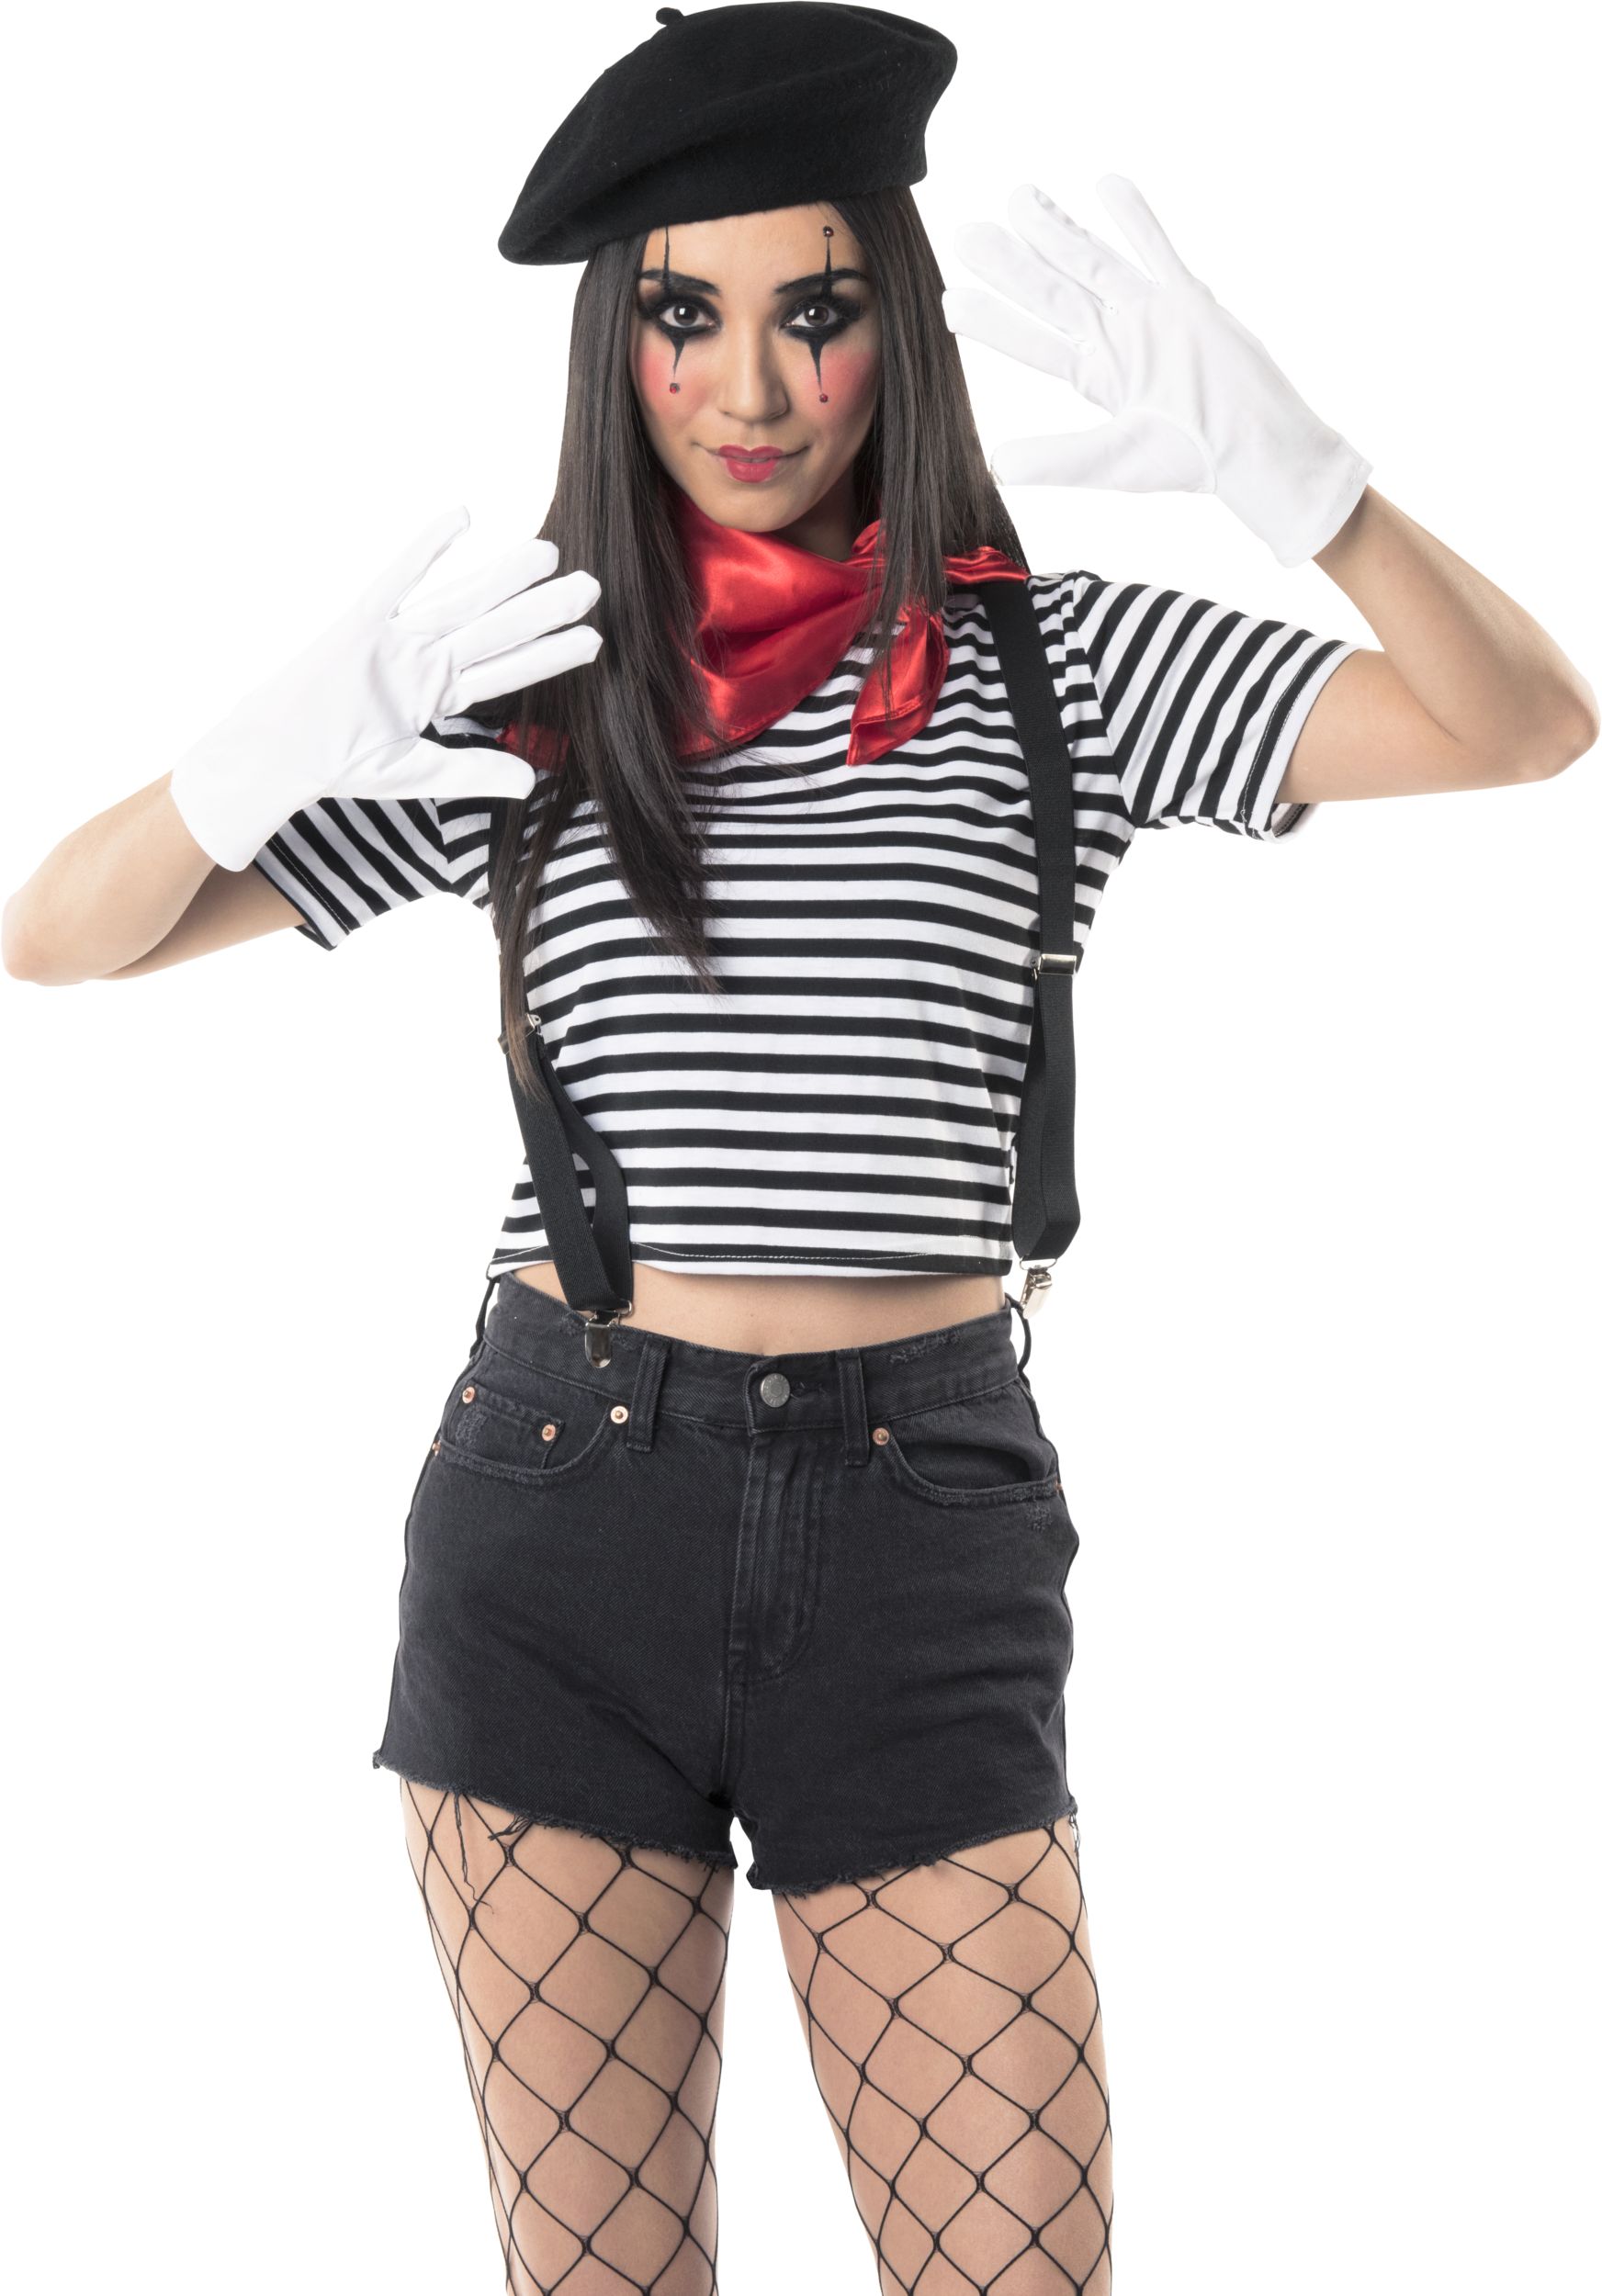 Adult French Mime Kit with Beret Hat, Gloves, Suspenders & Bandana,  Black/White/Red, One Size, 4-pk, Wearable Costume Accessories for Halloween